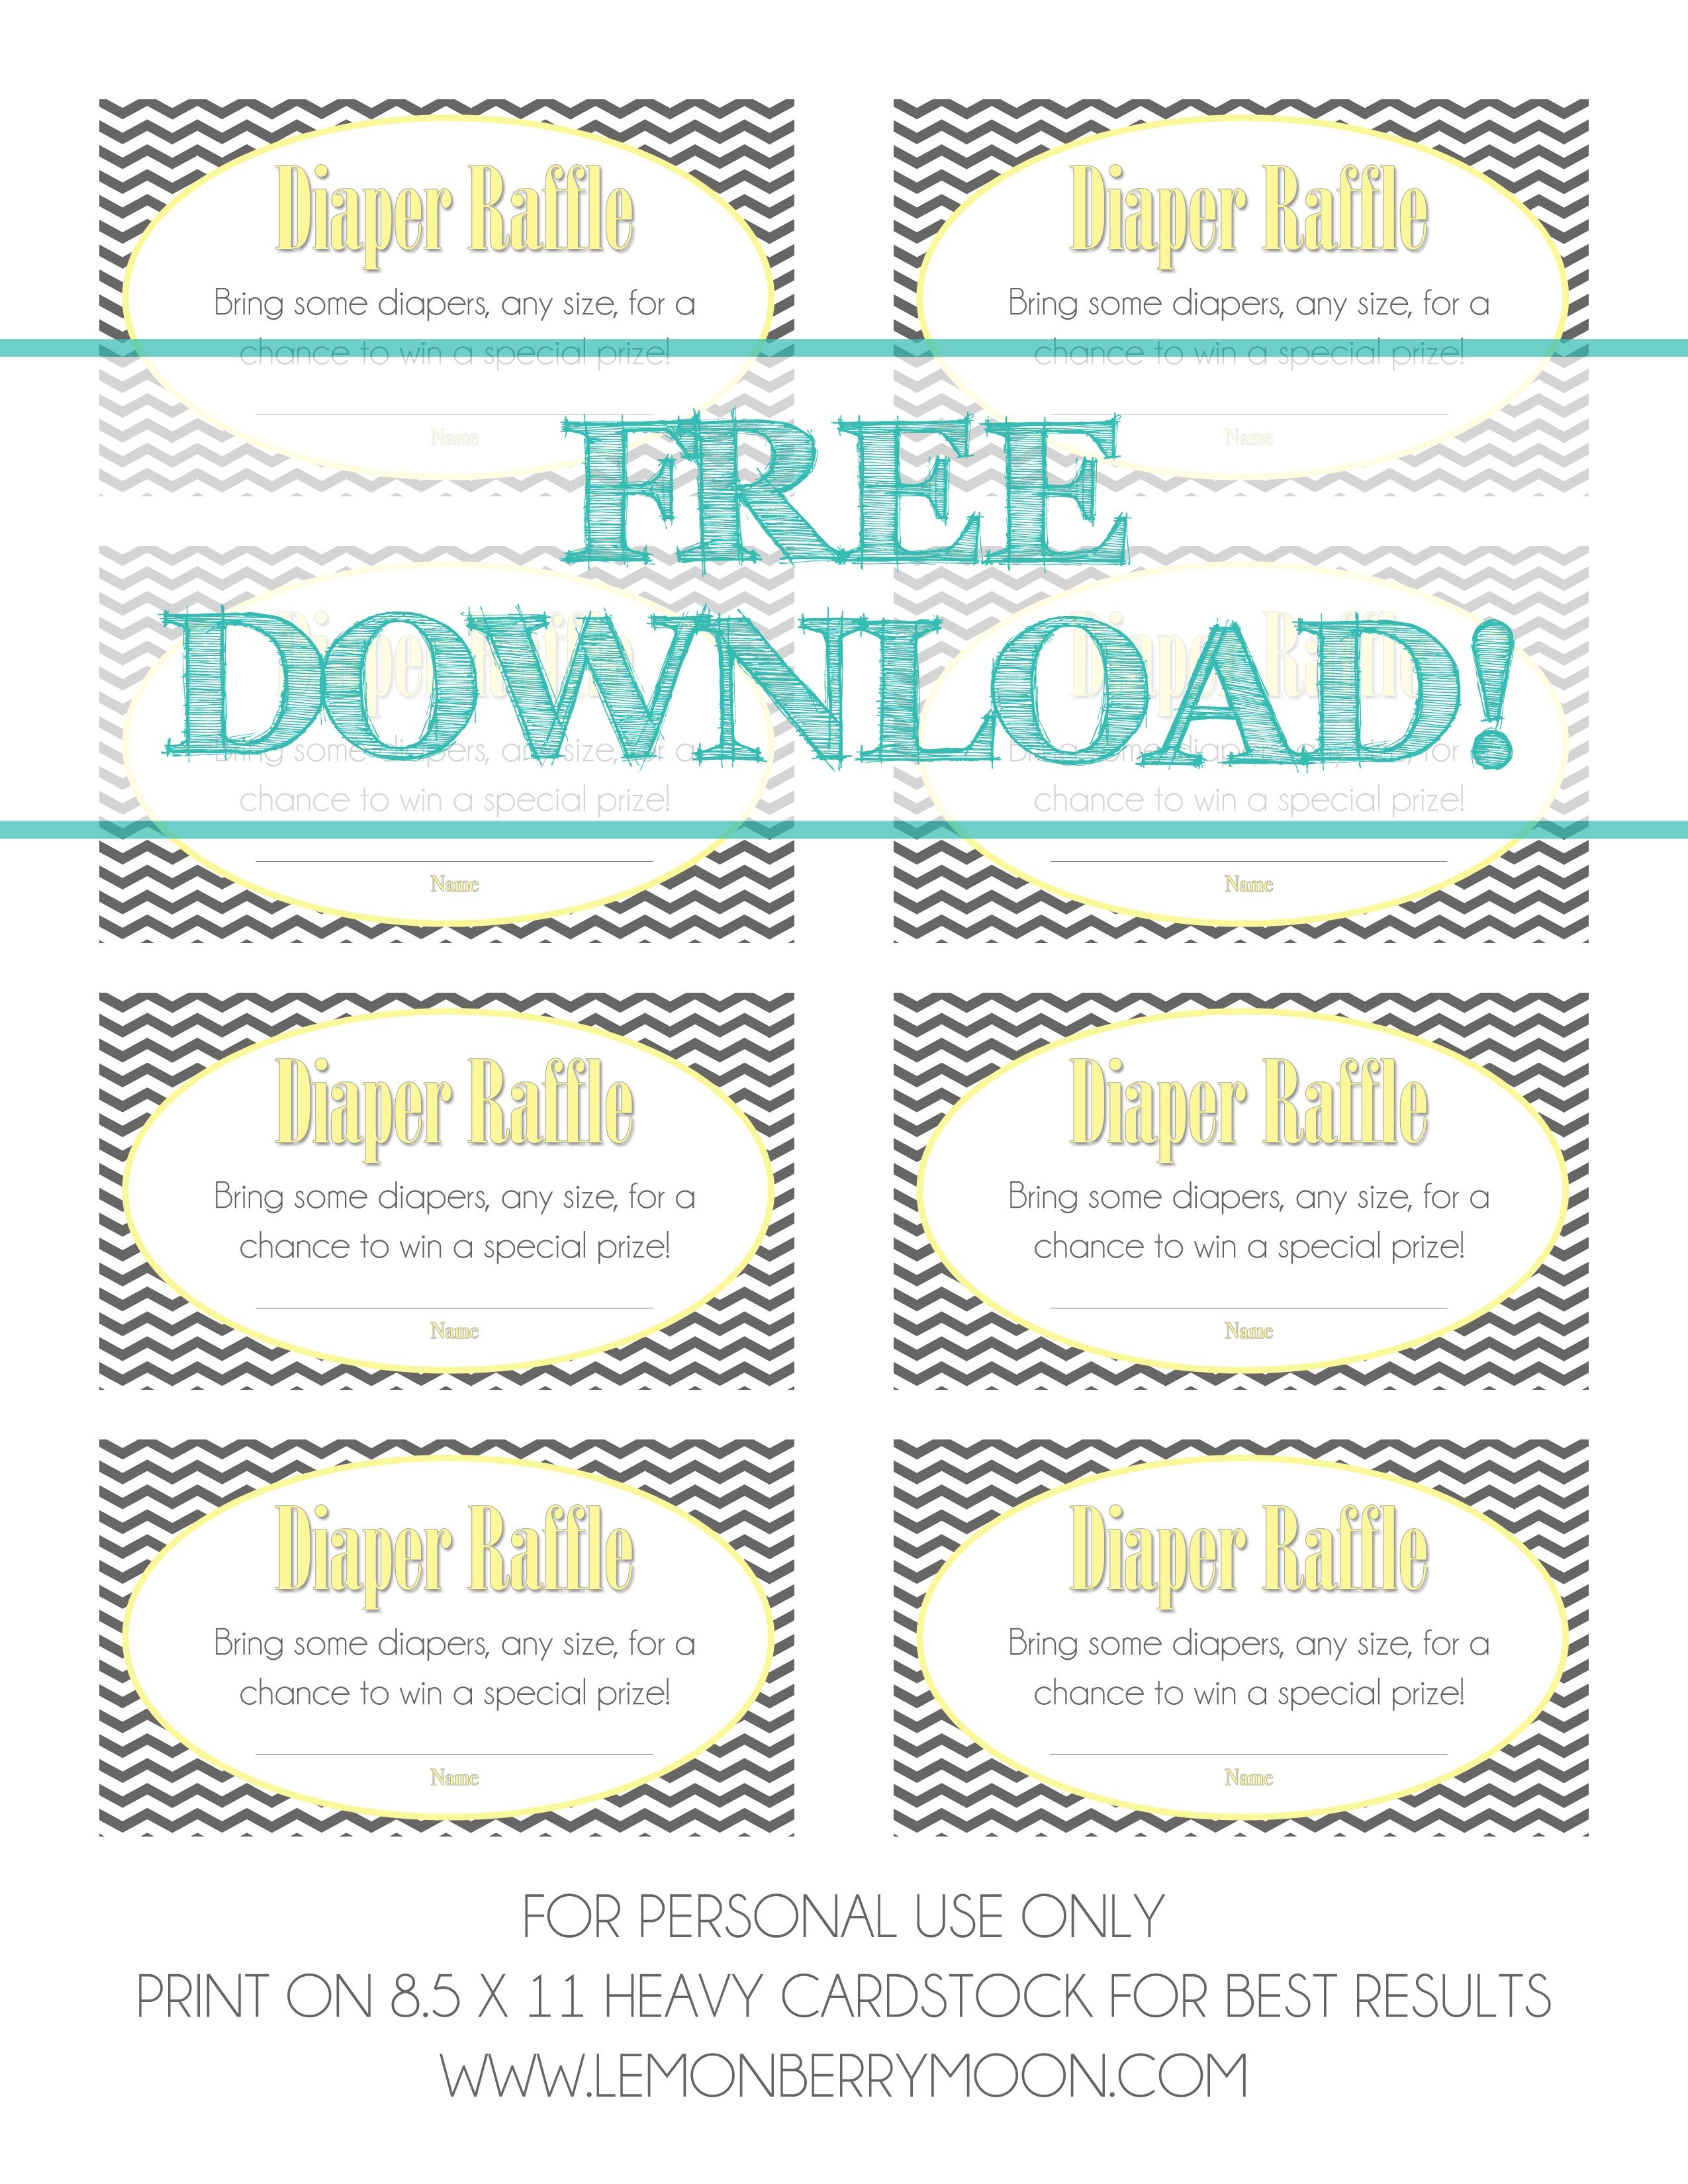 Free Download - Baby Diaper Raffle Template | Baaby Shower | Baby - Free Printable Diaper Raffle Tickets